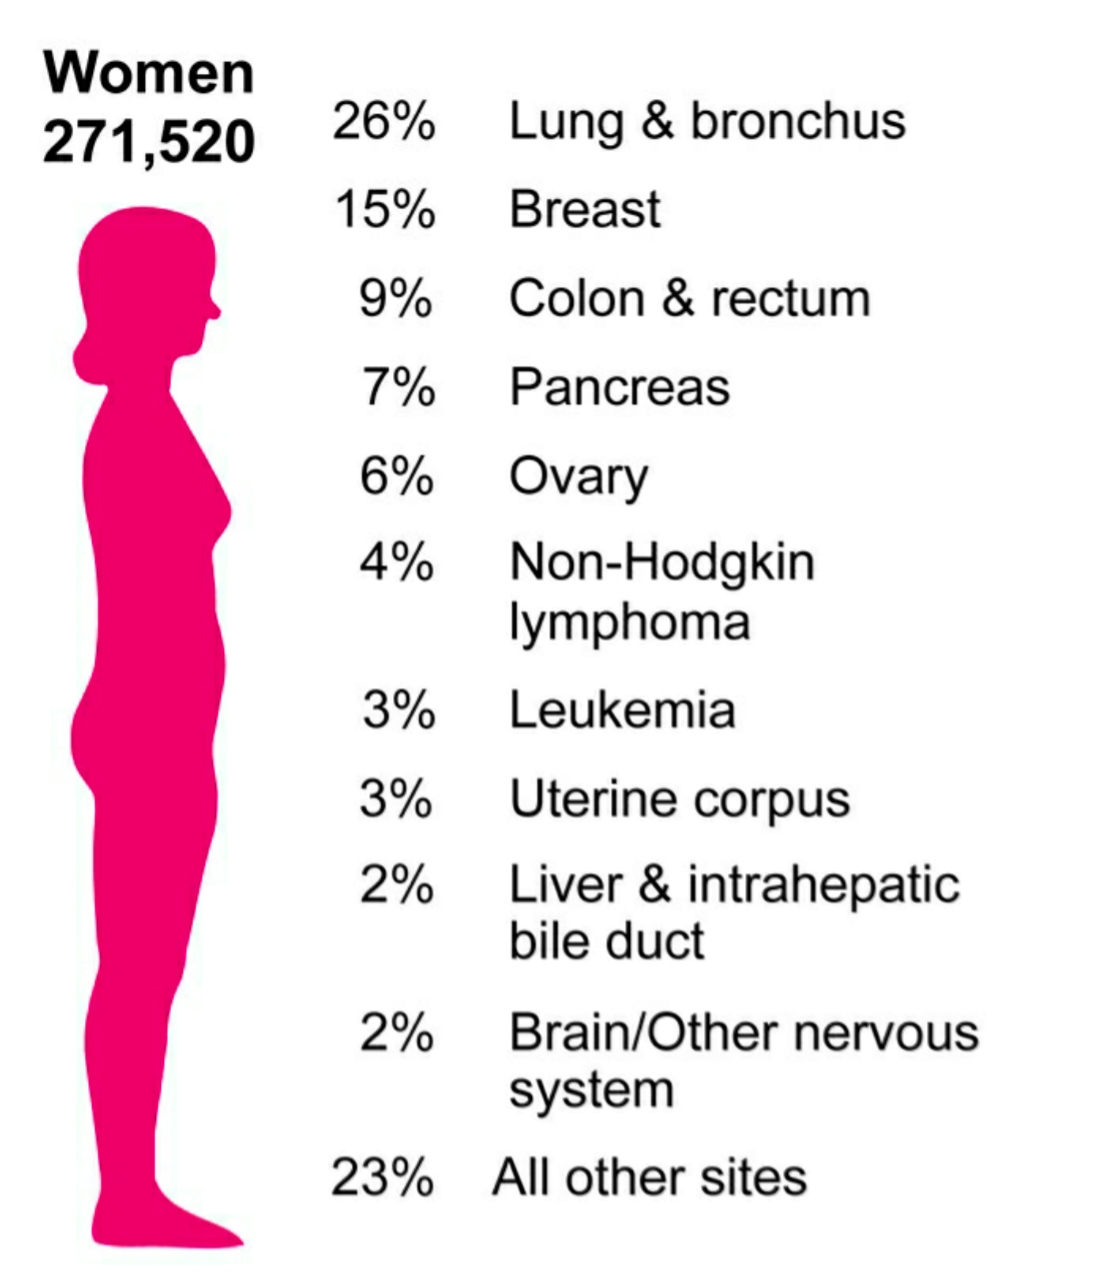 cancer mortality in women